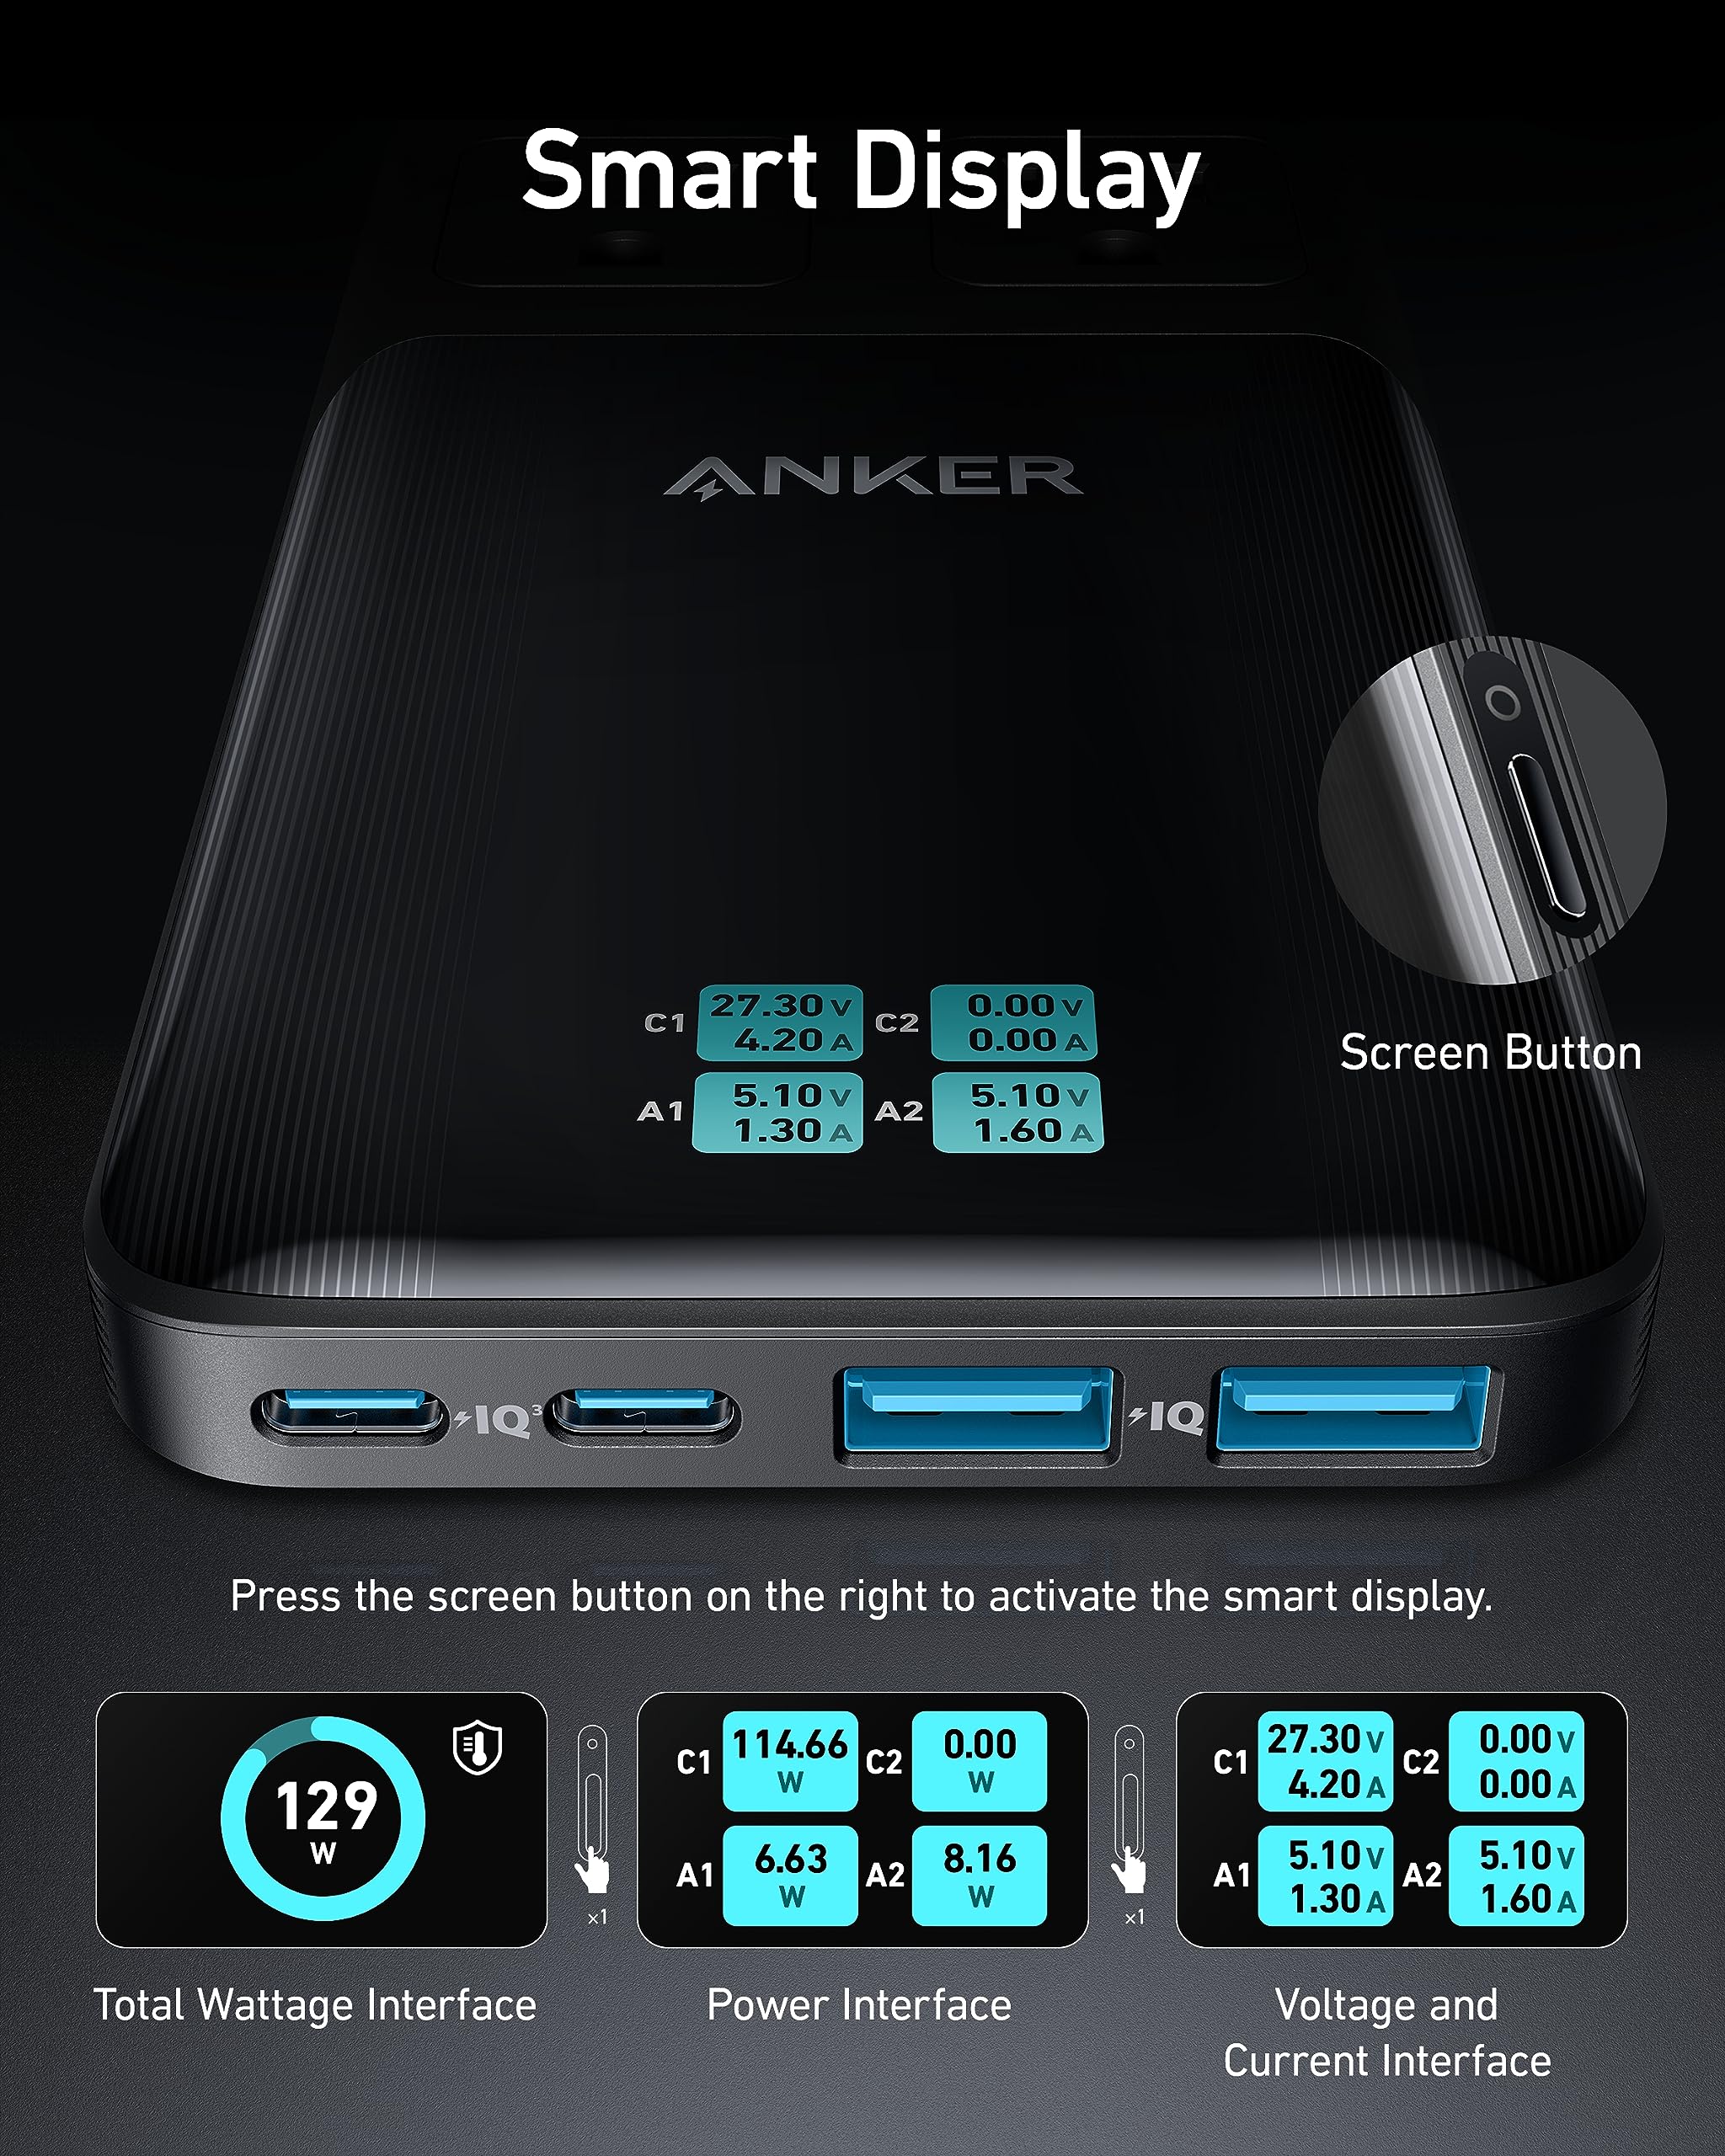 Anker Prime 6-in-1 Charging Station (140W)